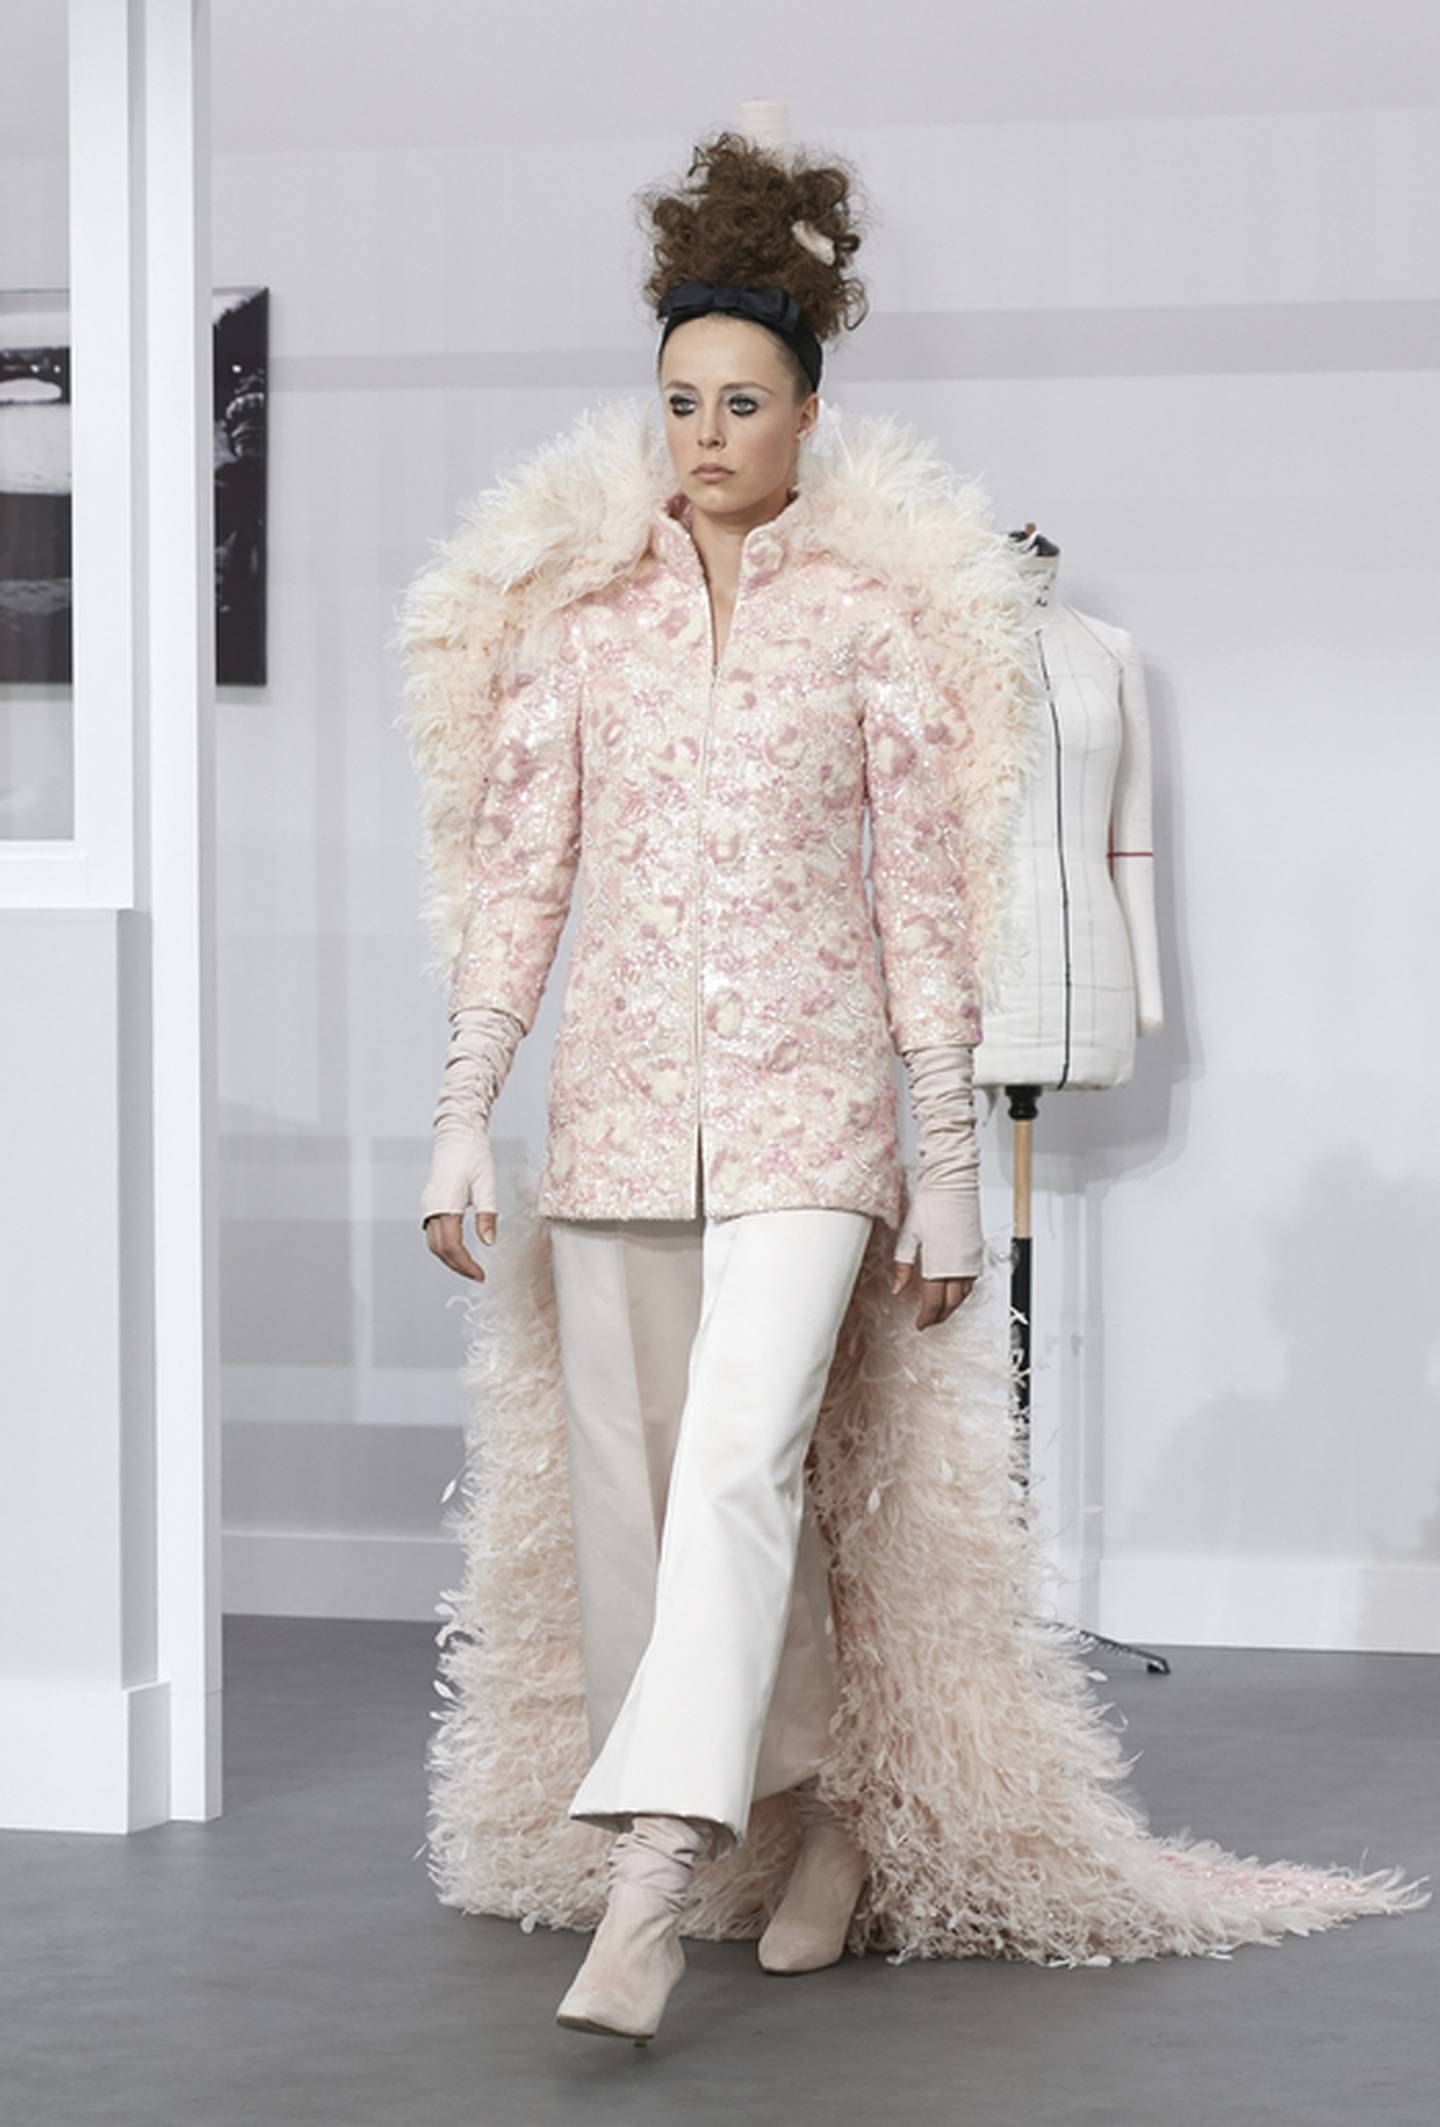 A model in a Karl Lagerfeld bridalwear creation featuring trousers fashioned from lace, tulle and satin, encrusted with strands of pink and white wool. Photo: Chanel